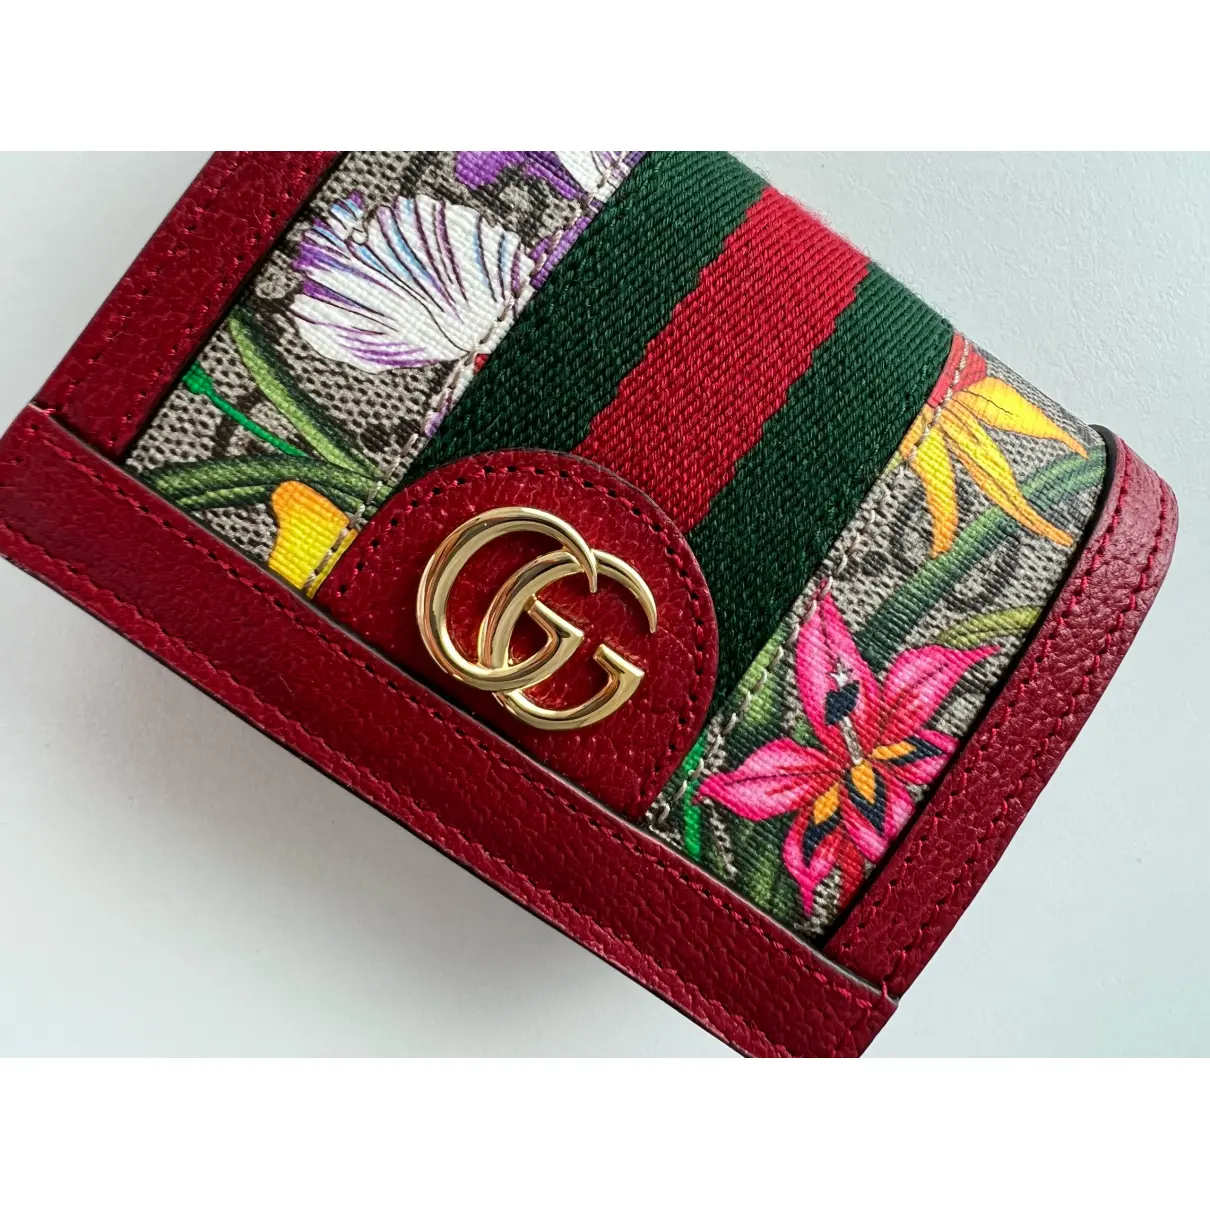 Buy Gucci Ophidia leather purse online